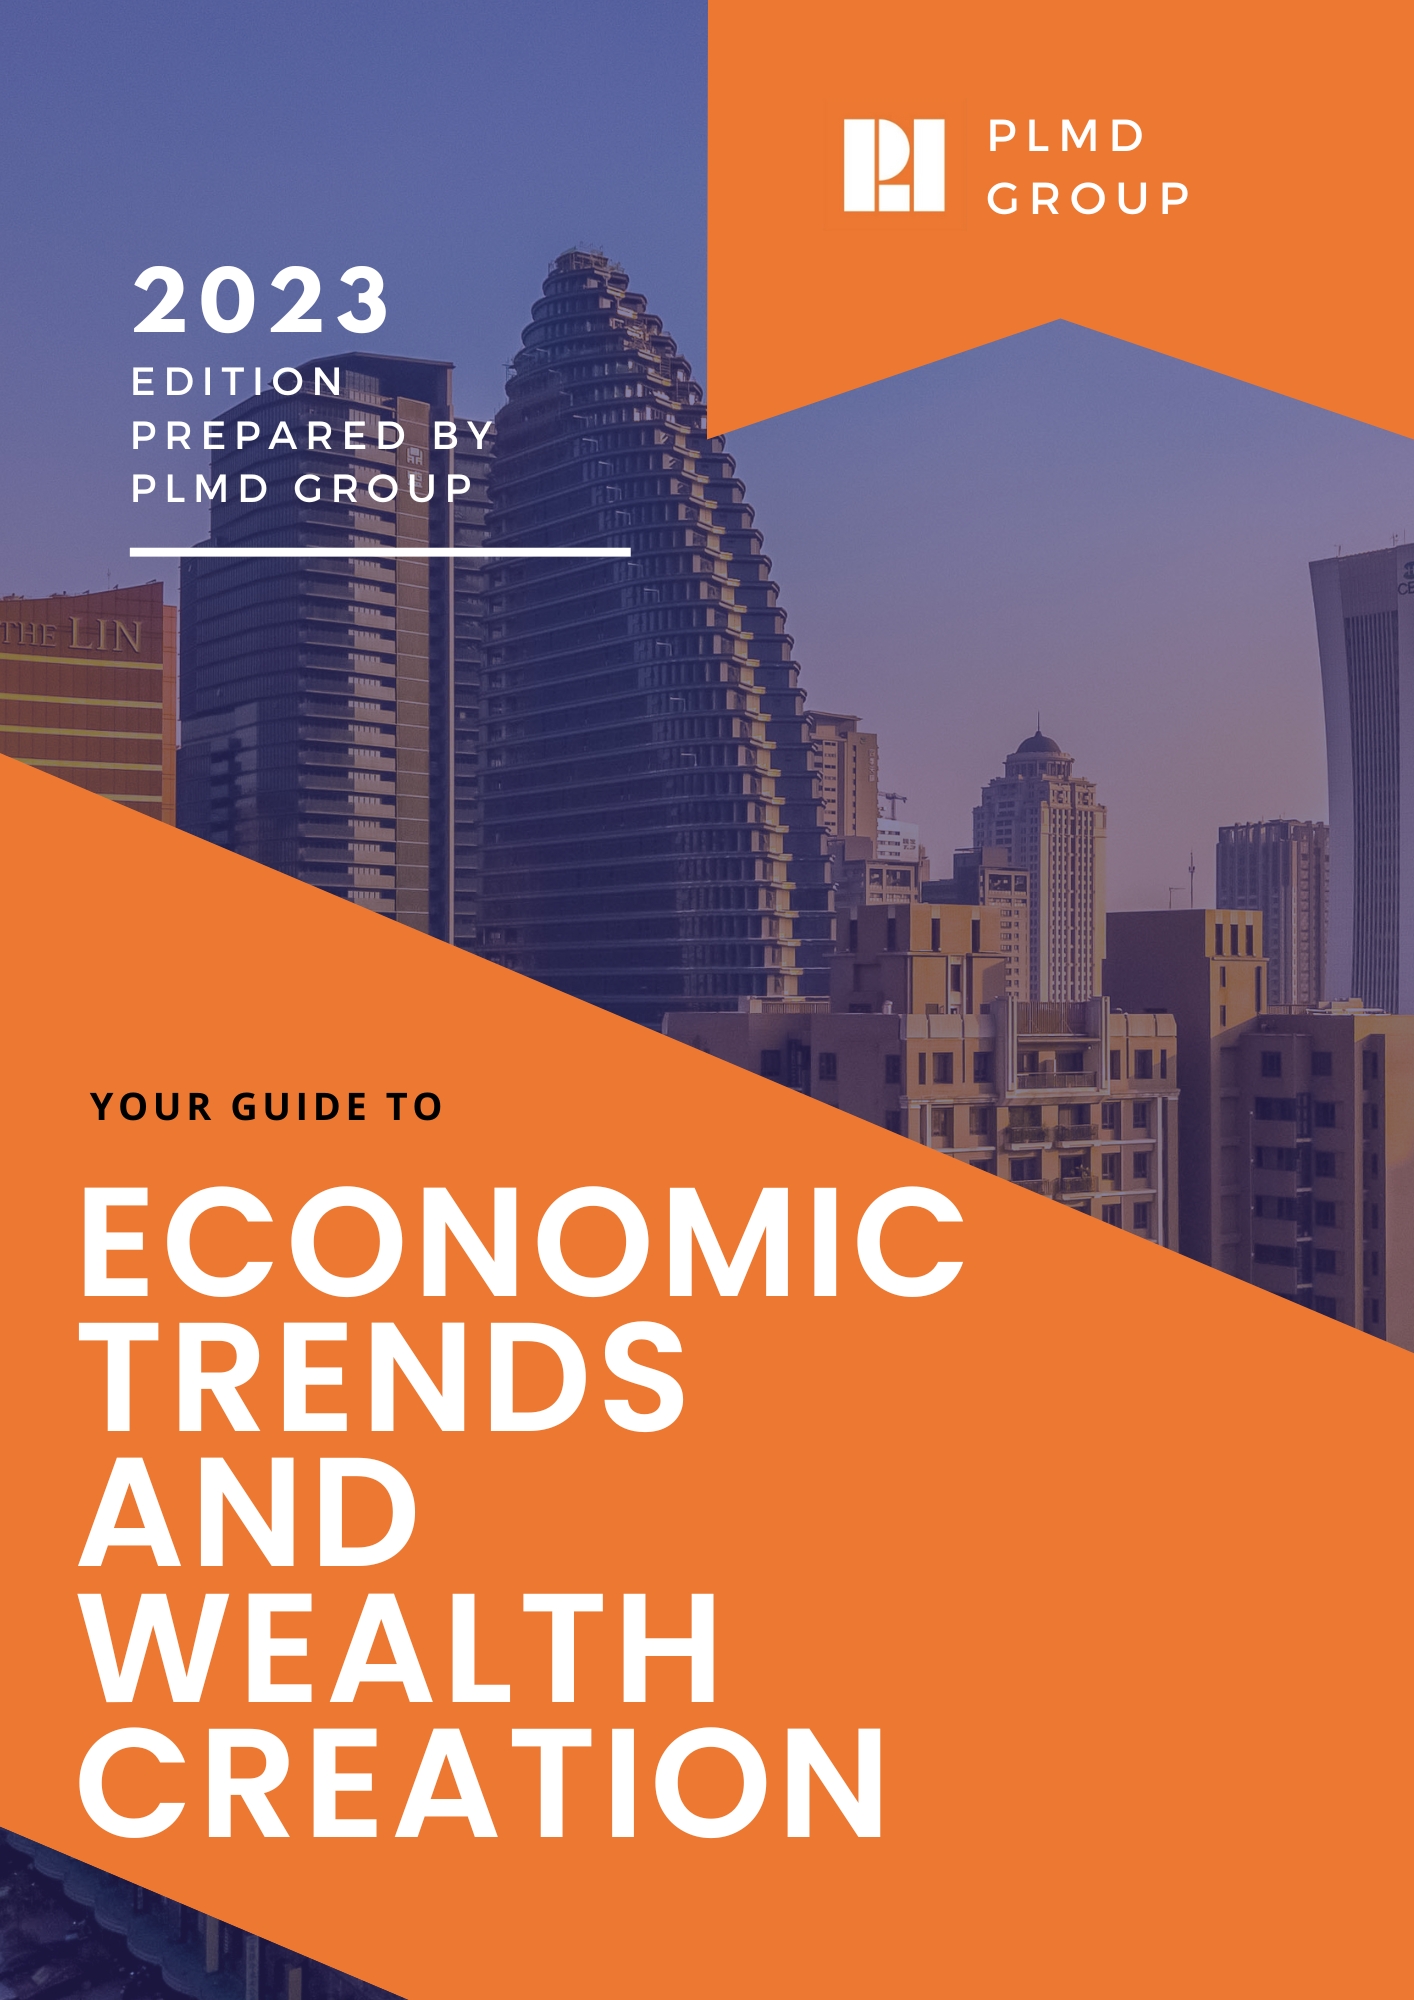 PLMD Group Guide to  eco trends and wealth creation  (1)